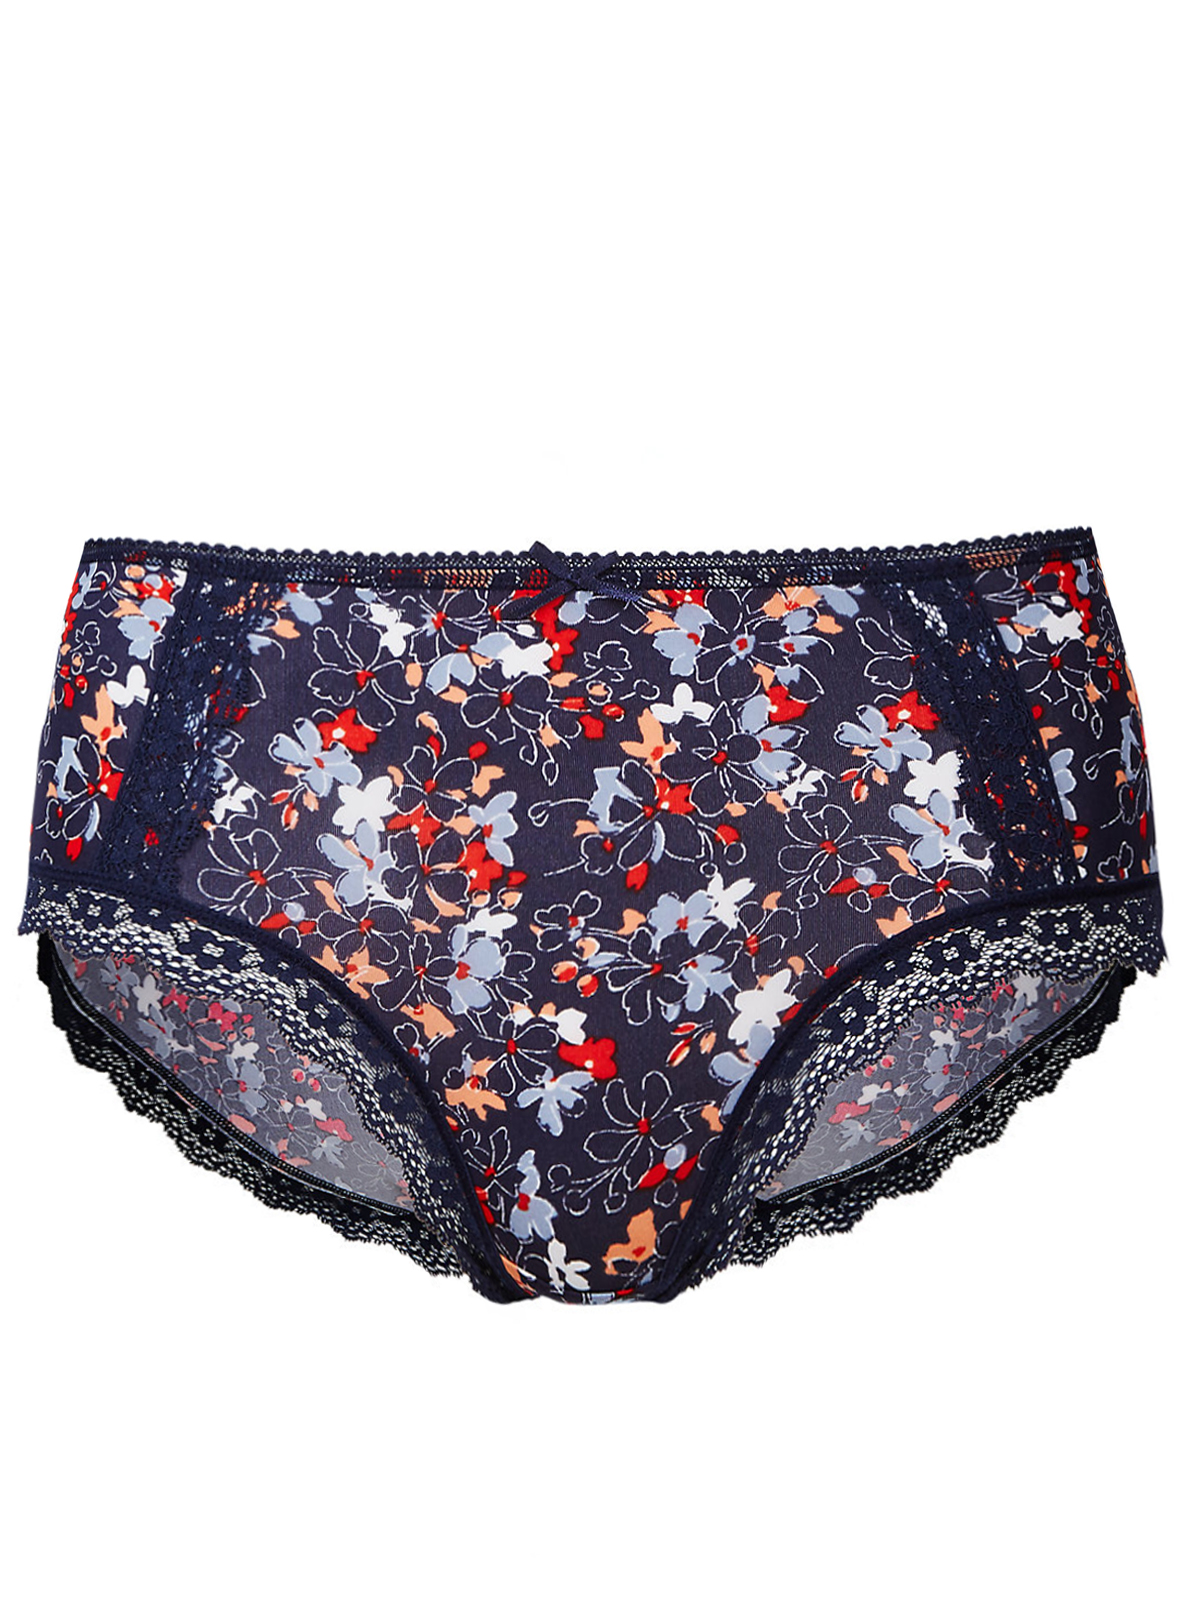 Marks and Spencer - - M&5 BLUE Floral Print Lace Trim Midi Knickers